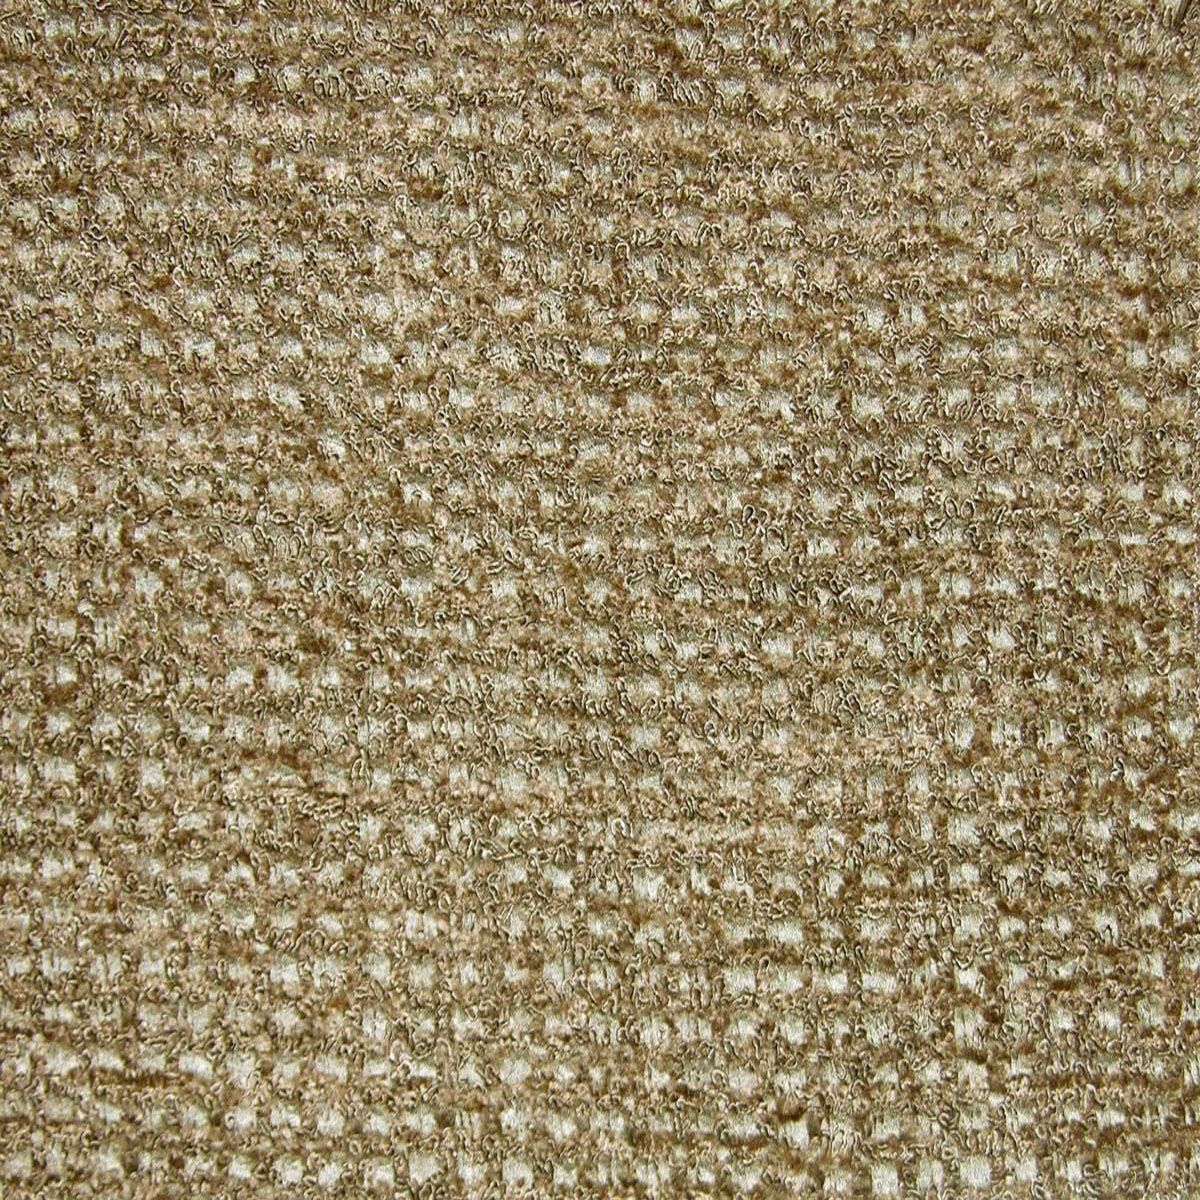 Crested Butte fabric in mocha color - pattern number PW 00094083 - by Scalamandre in the Old World Weavers collection